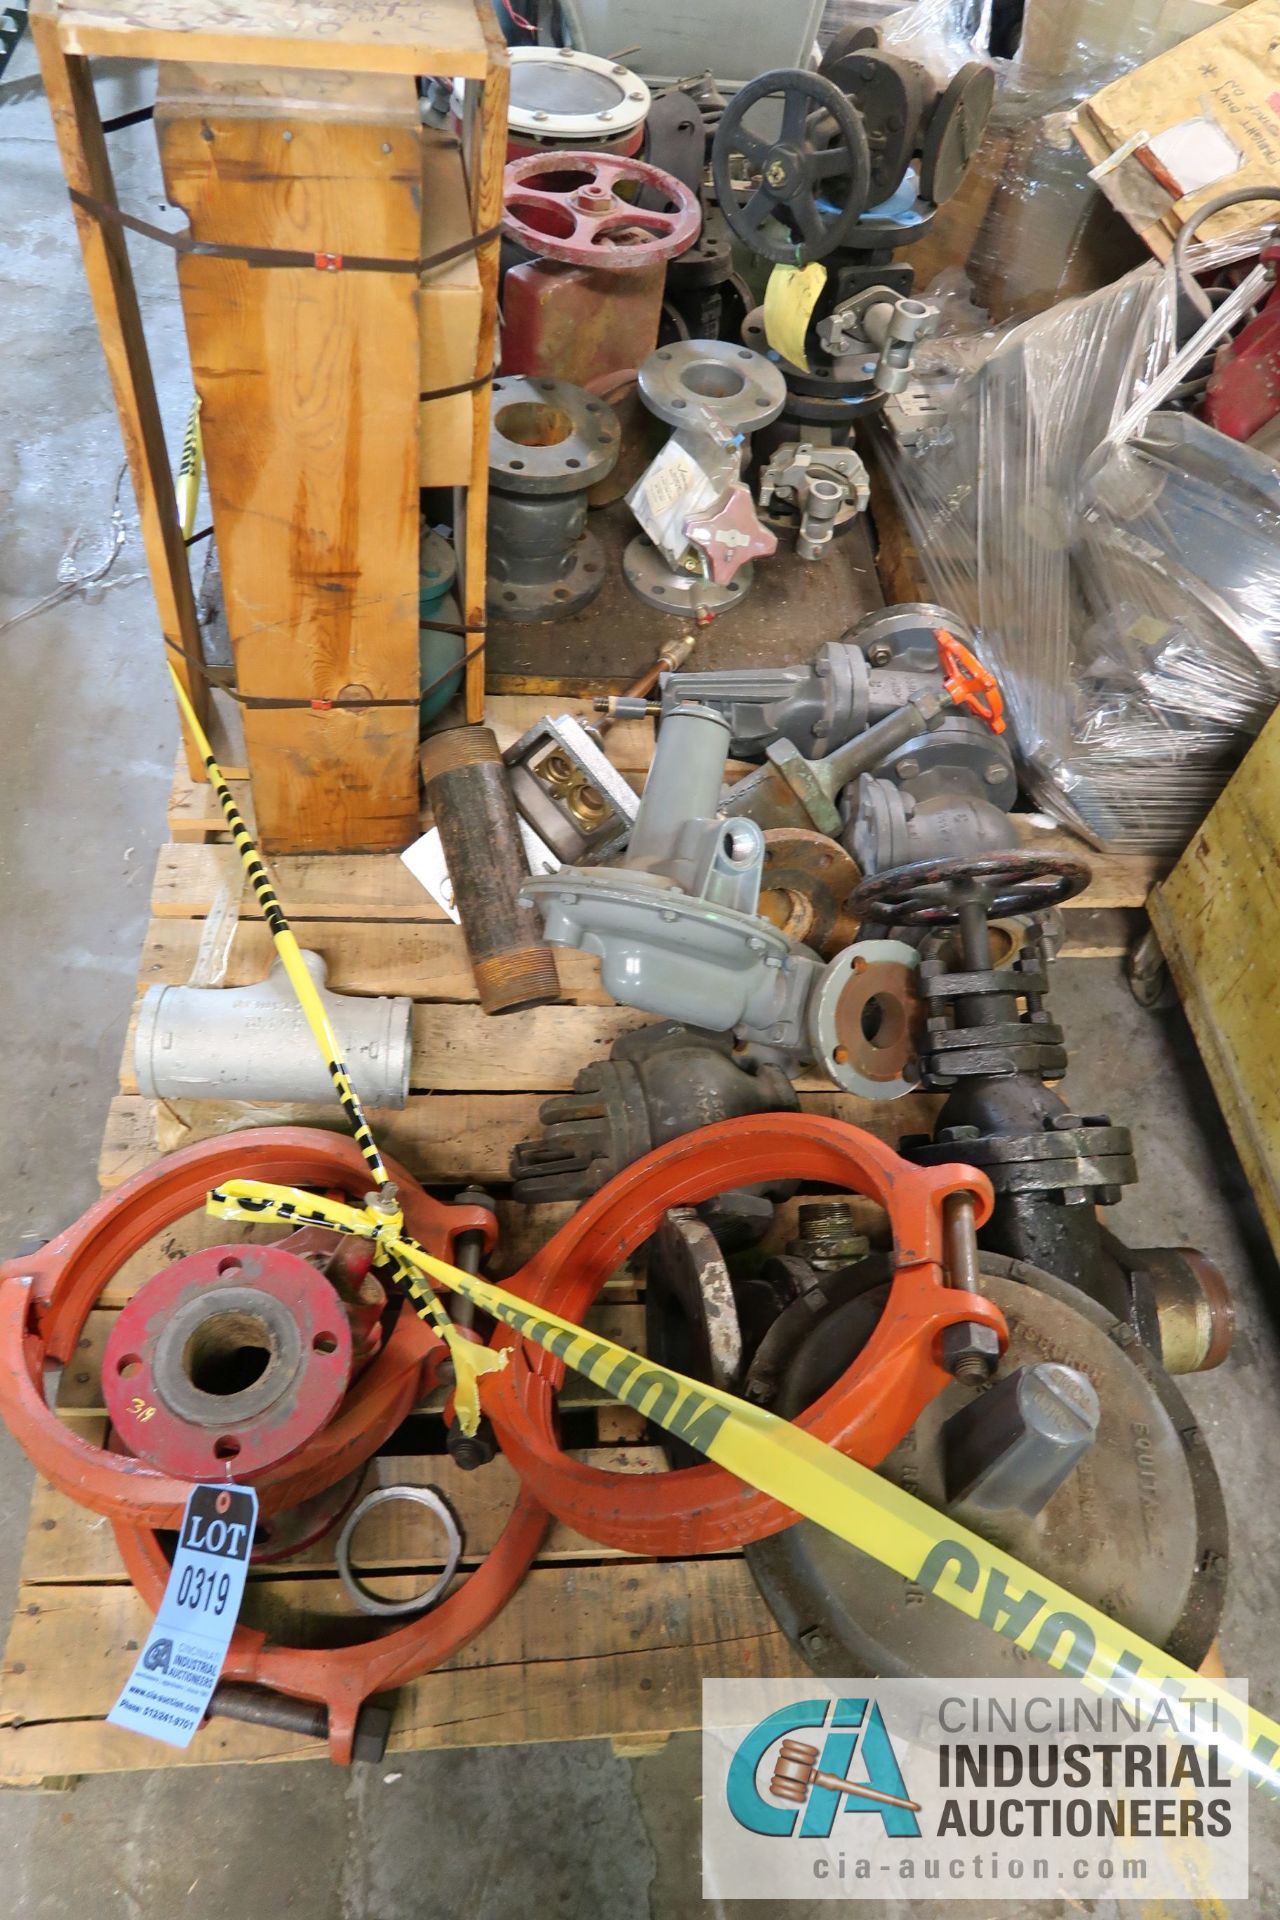 (LOT) LARGE QUANTITY OF GATE VALVES (UO TO 6") AND PIPE FLANGES ON (6) SKIDS AND (1) JOBOX - SEE - Image 4 of 11